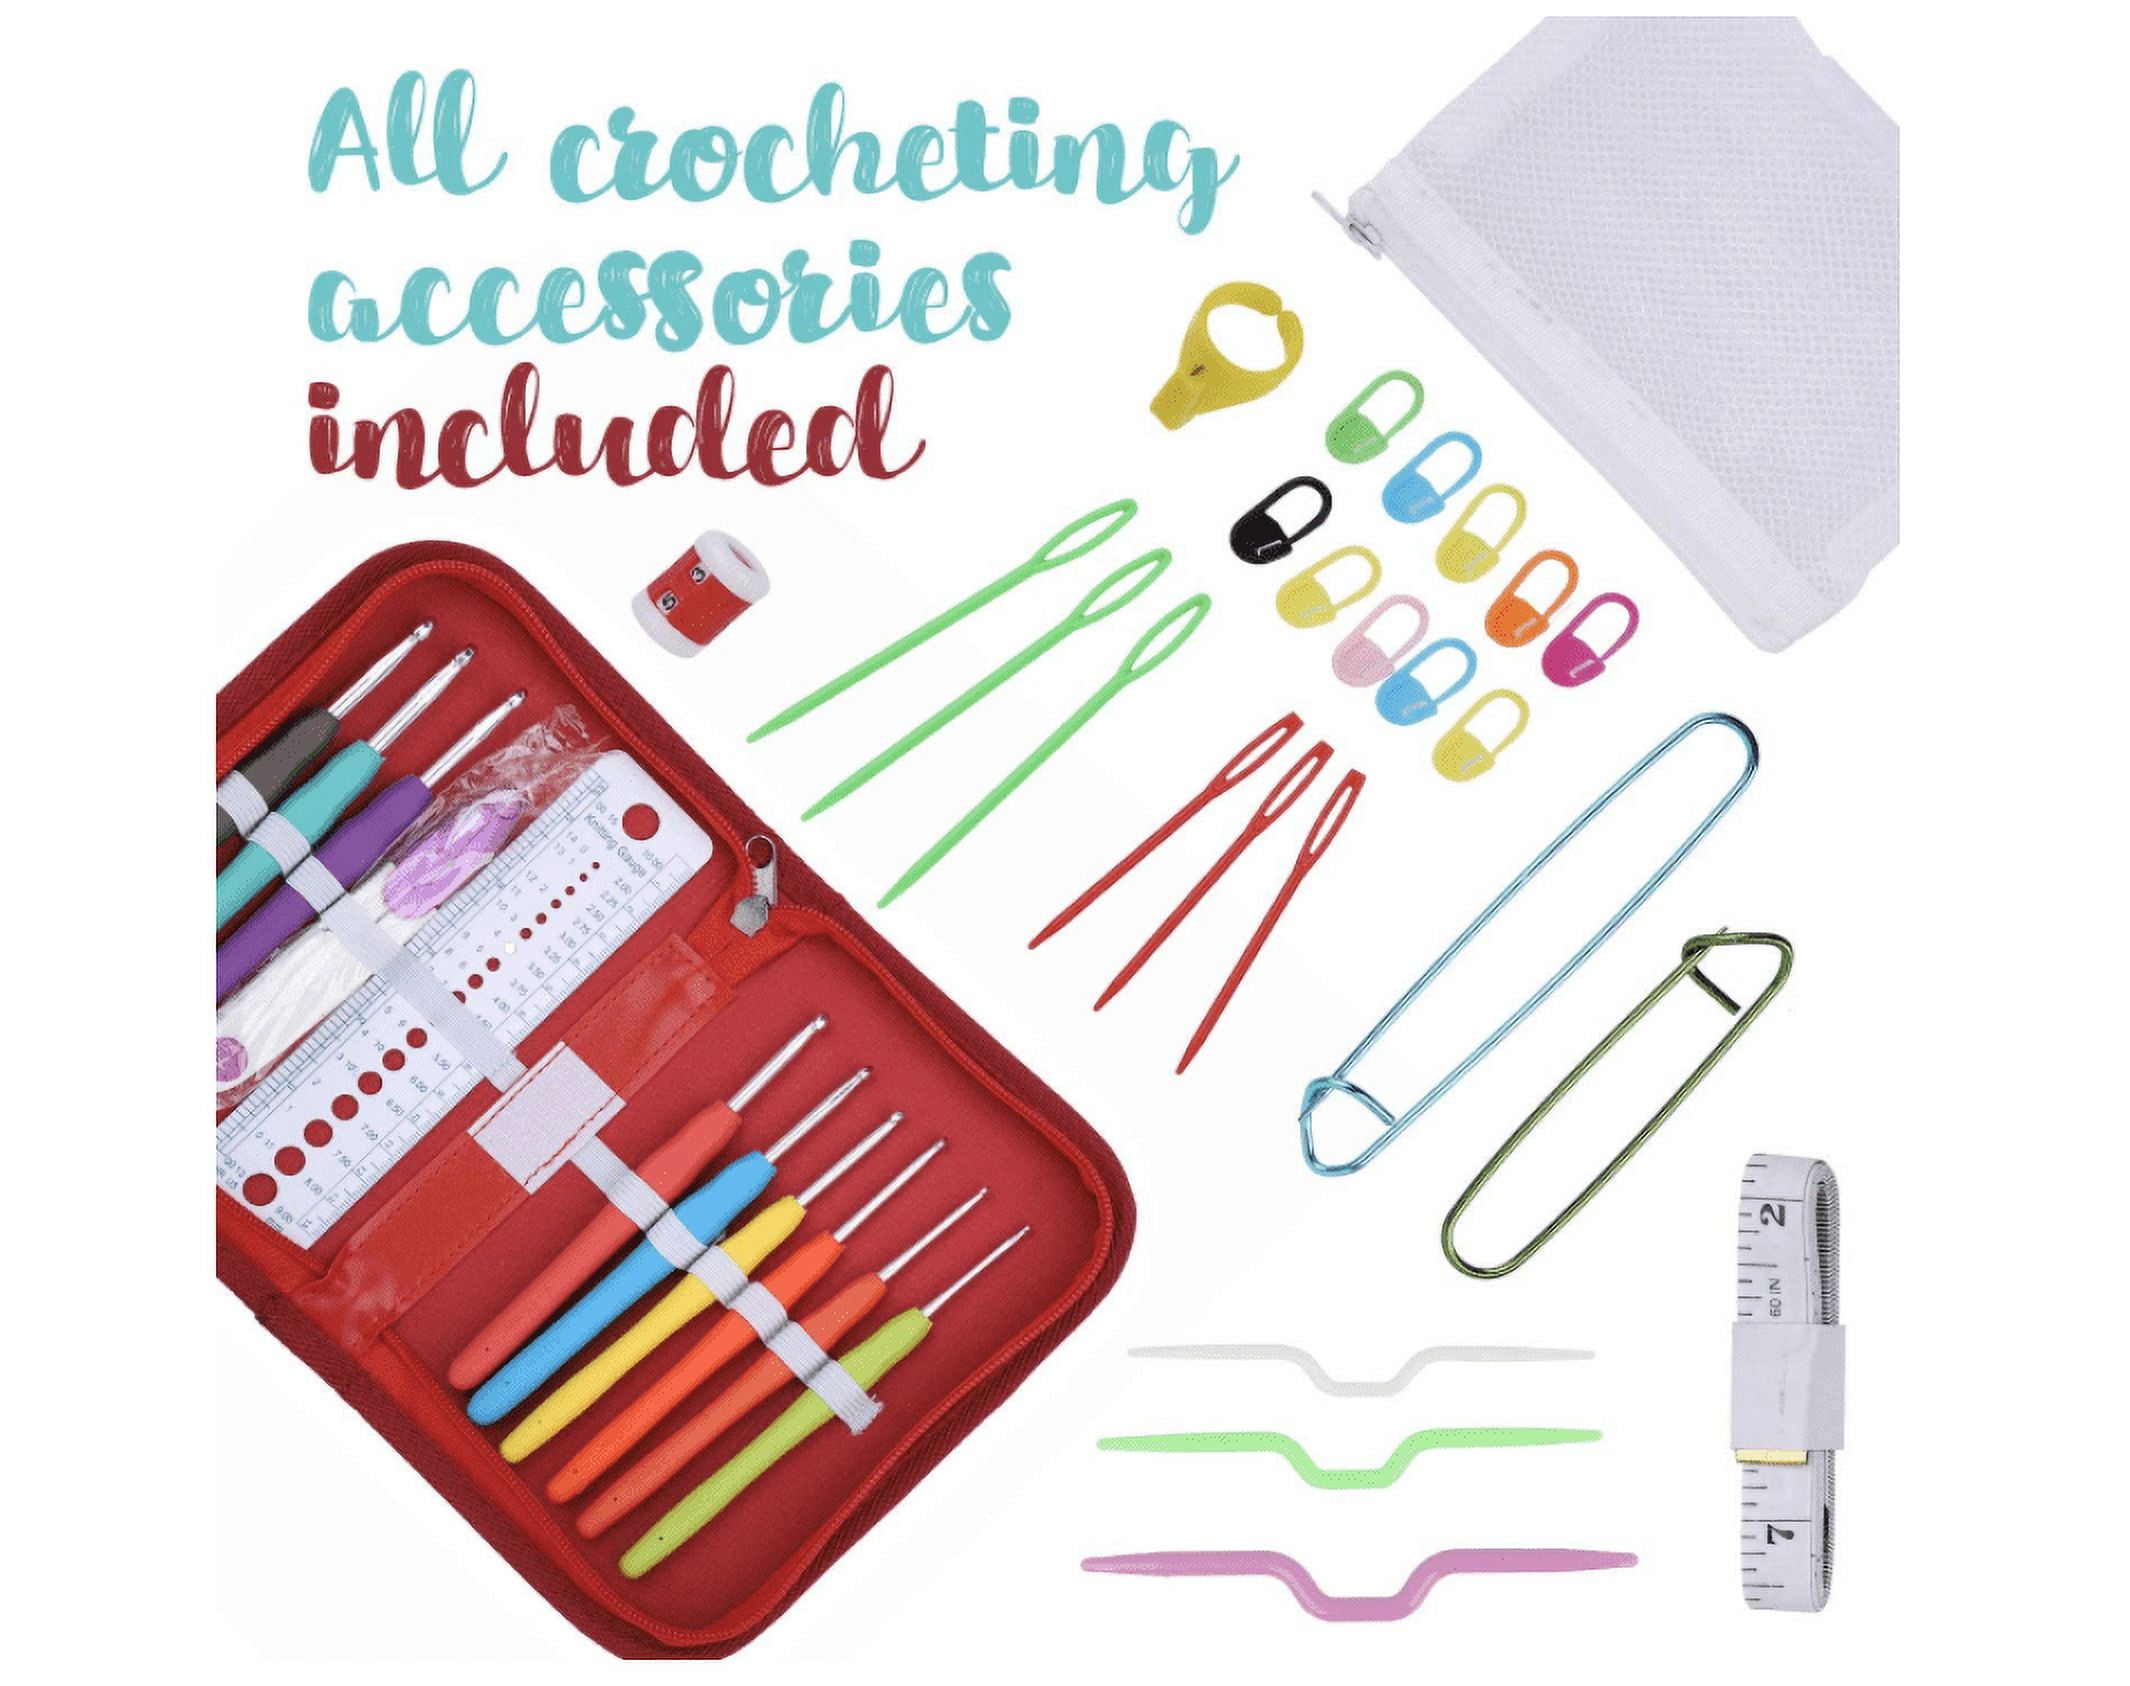  73 Piece Crochet Kit for Beginners Adults and Kids, Premium  Crochet Set with 21 Crochet Hooks Set and 1500 Yards of Yarn for Crocheting  Kit, Canvas Tote Bag and Lots More